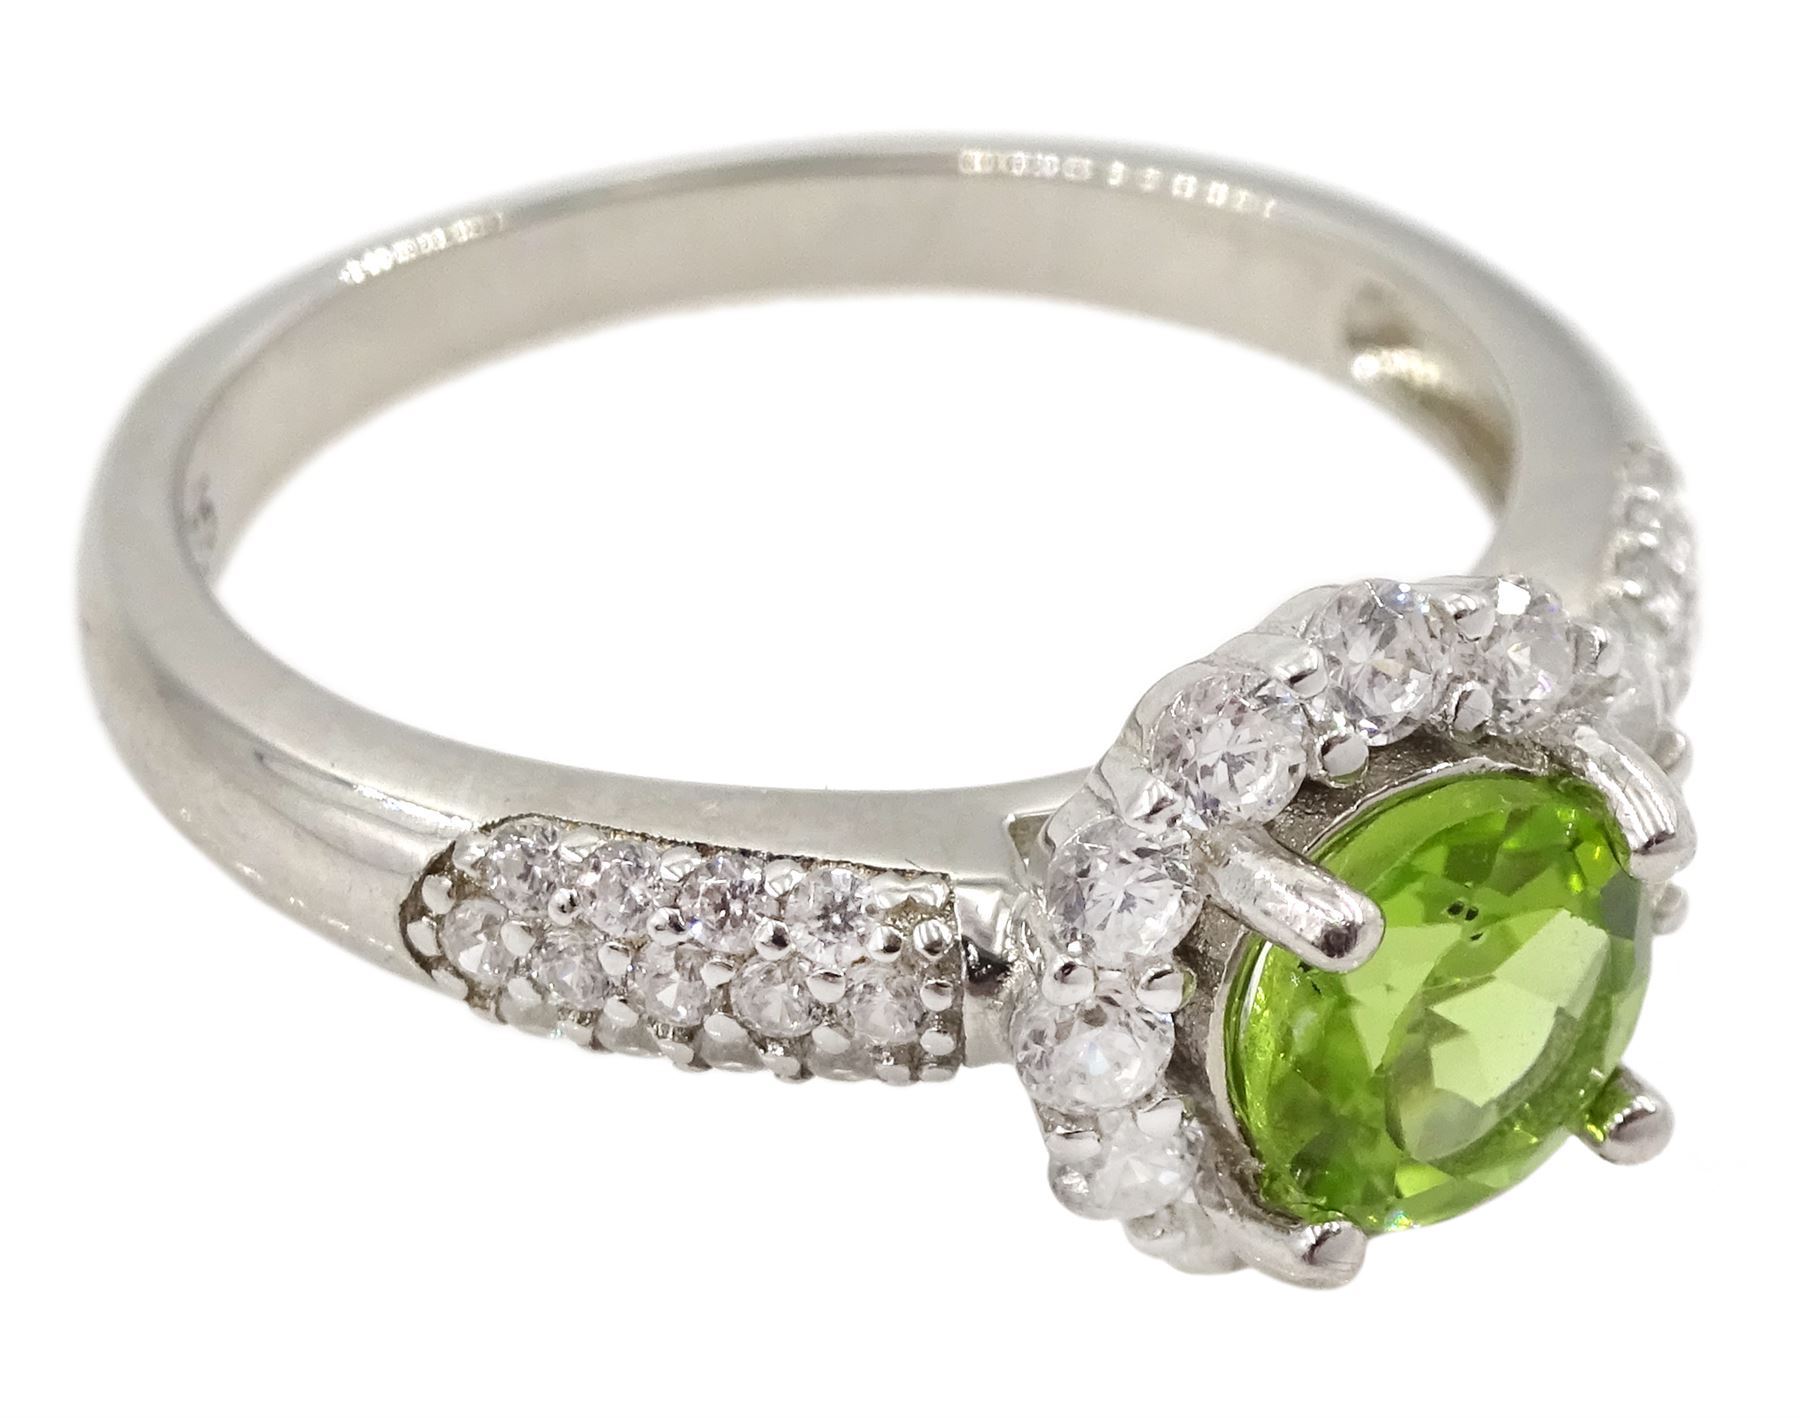 Silver peridot and cubic zirconia flower cluster ring - Image 2 of 4